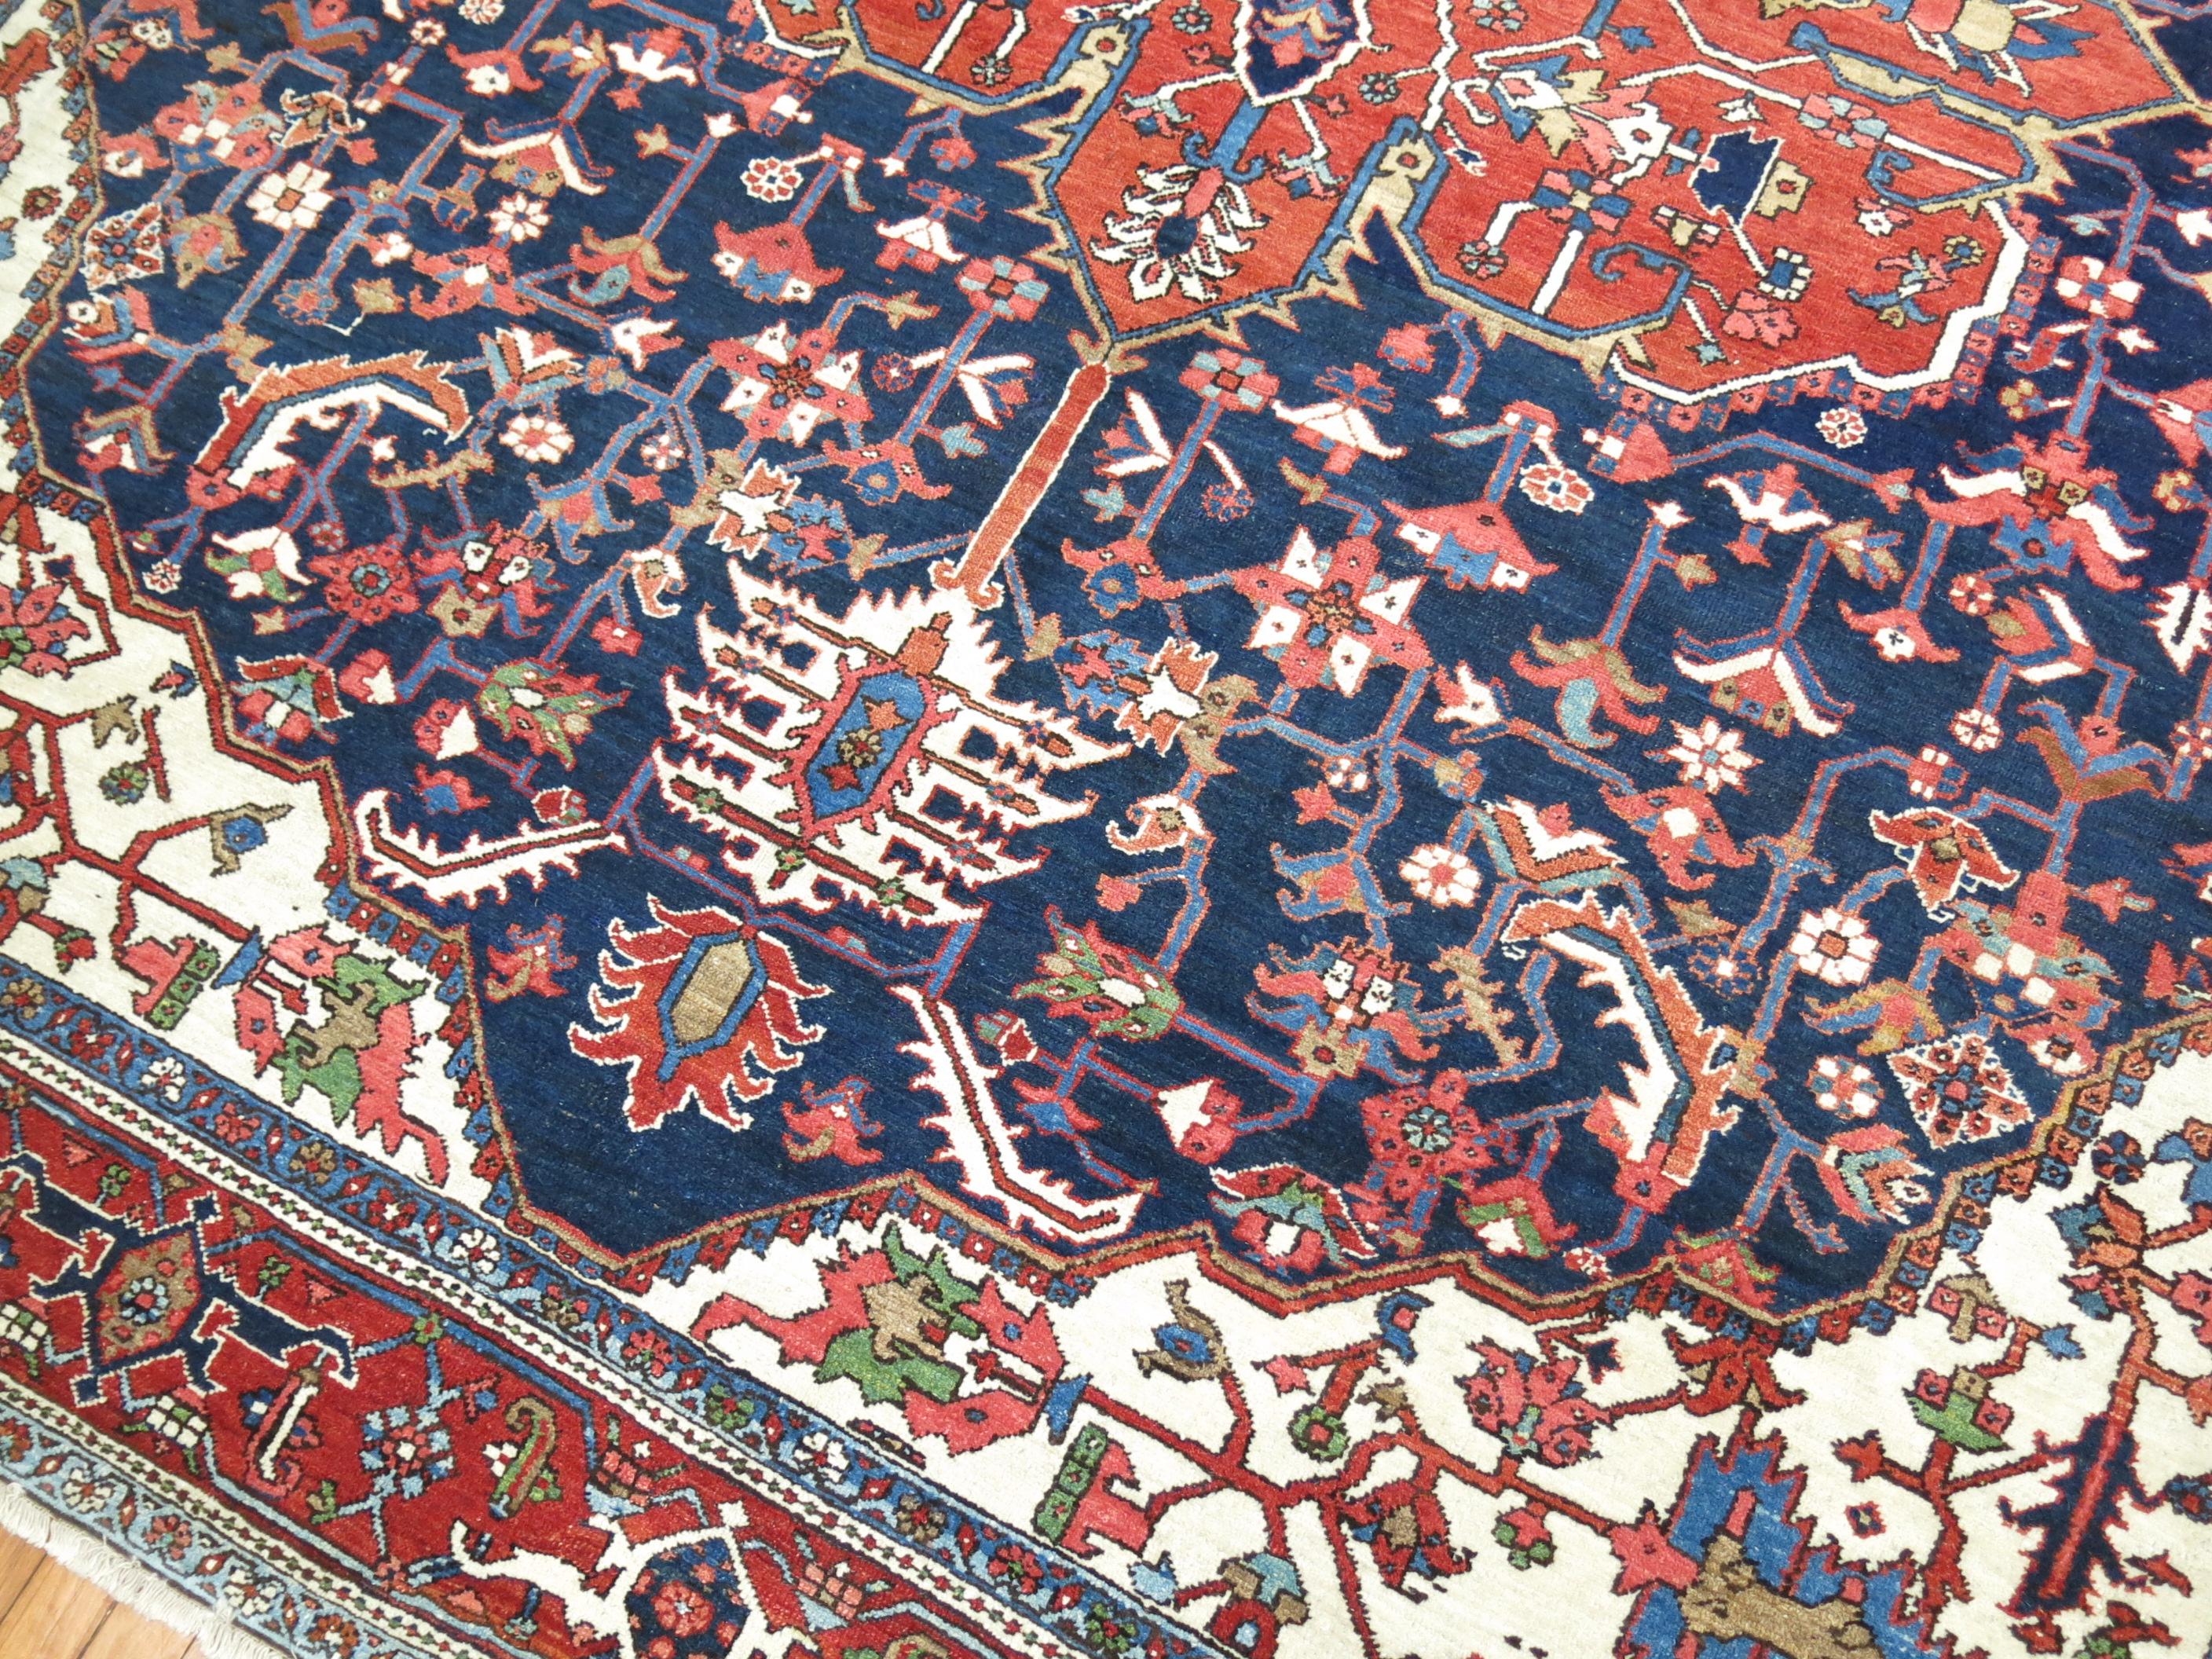 An early 20th-century traditional navy blue and brown accent, ivory field room size Persian Heriz carpet.

Measures: 9' x 11'3